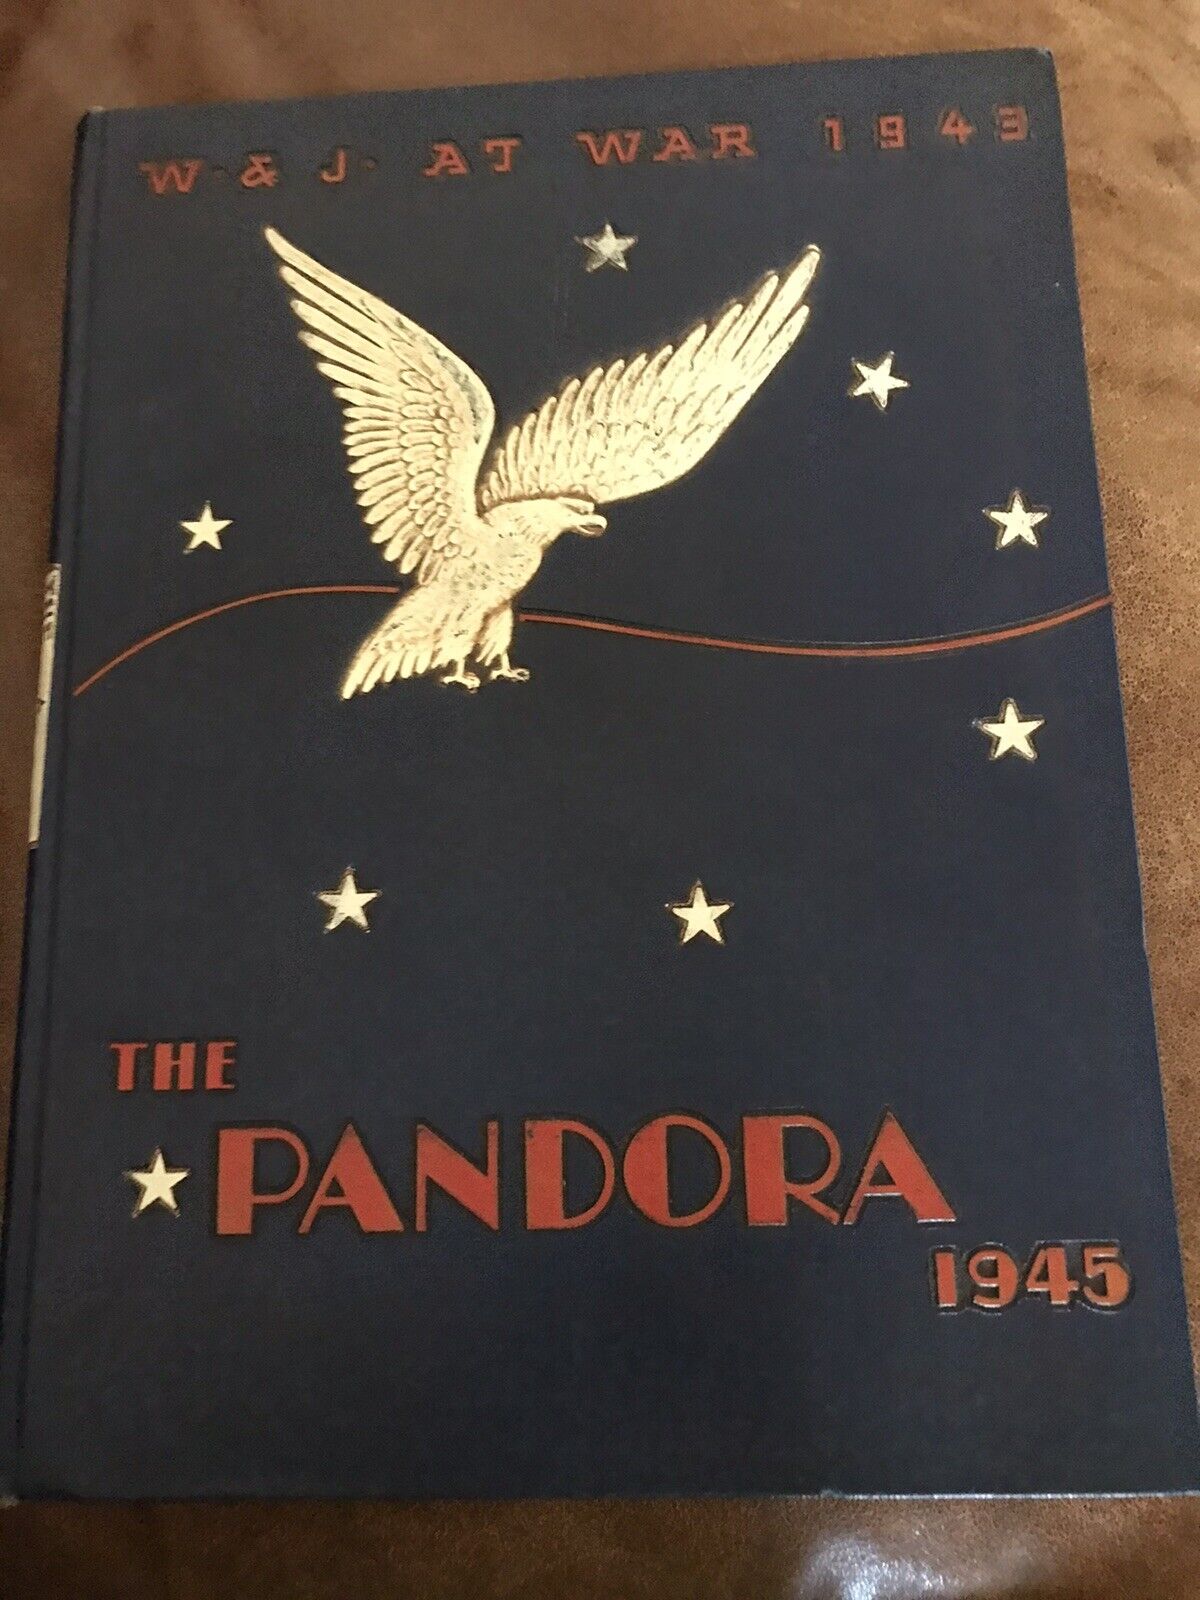 Waahington and Jefferson College The Pandora 1945  at War 1943 Yearbook 